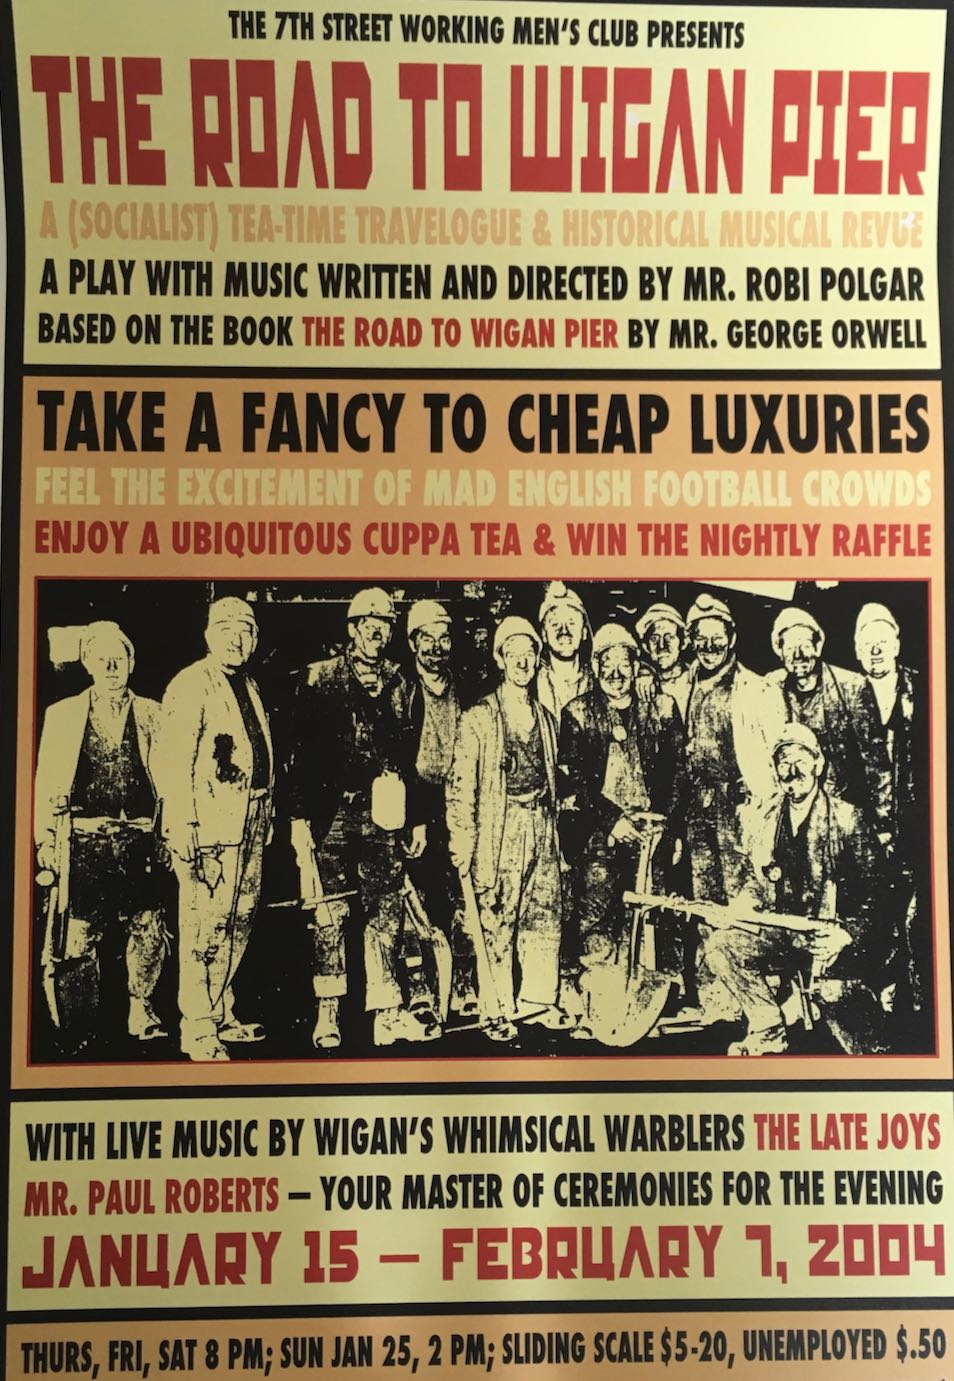 The Road to Wigan Pier: A (Socialist) Tea-Time Travelogue & Historical Musical Revue, by Robi Polgar